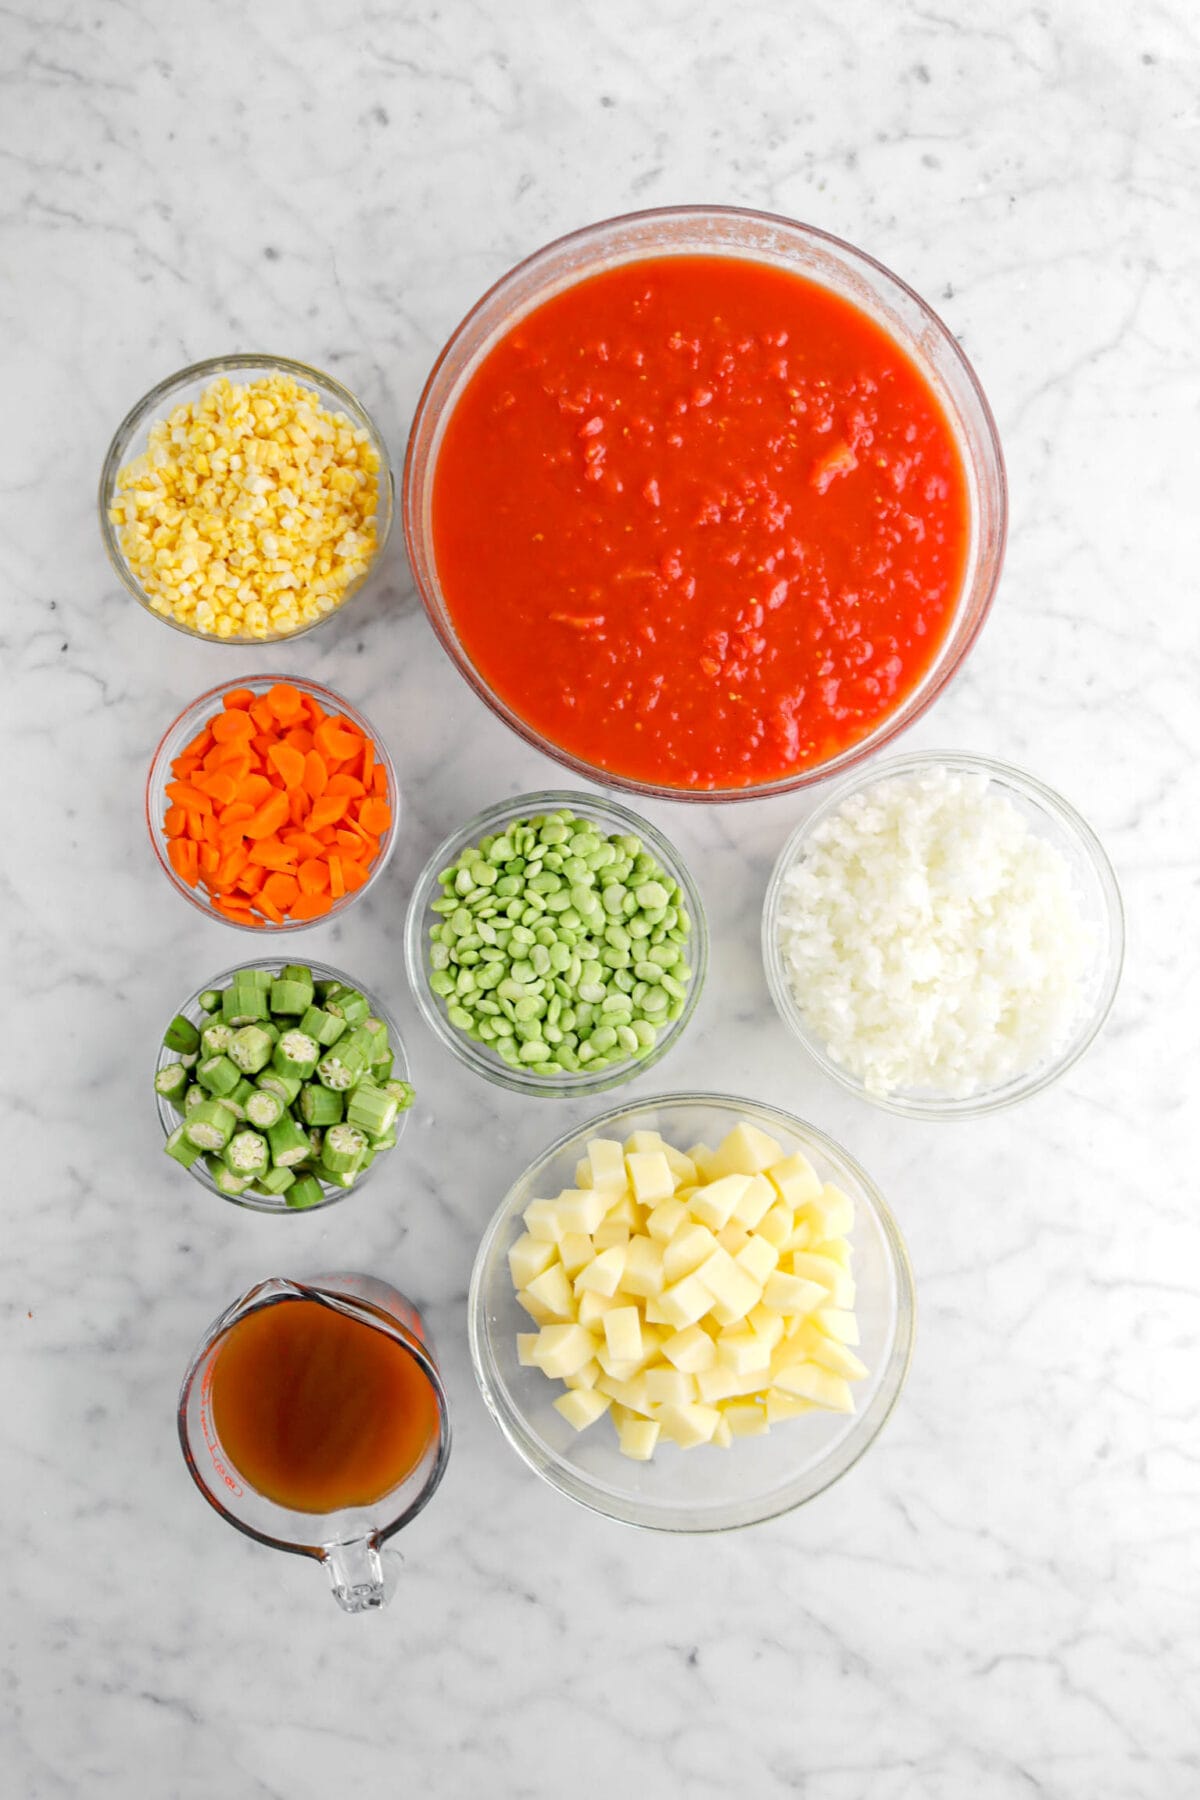 corn, chopped tomatoes, carrots, lima beans, okra, chopped onion, chopped potatoes, and vegetable broth on marble surface.